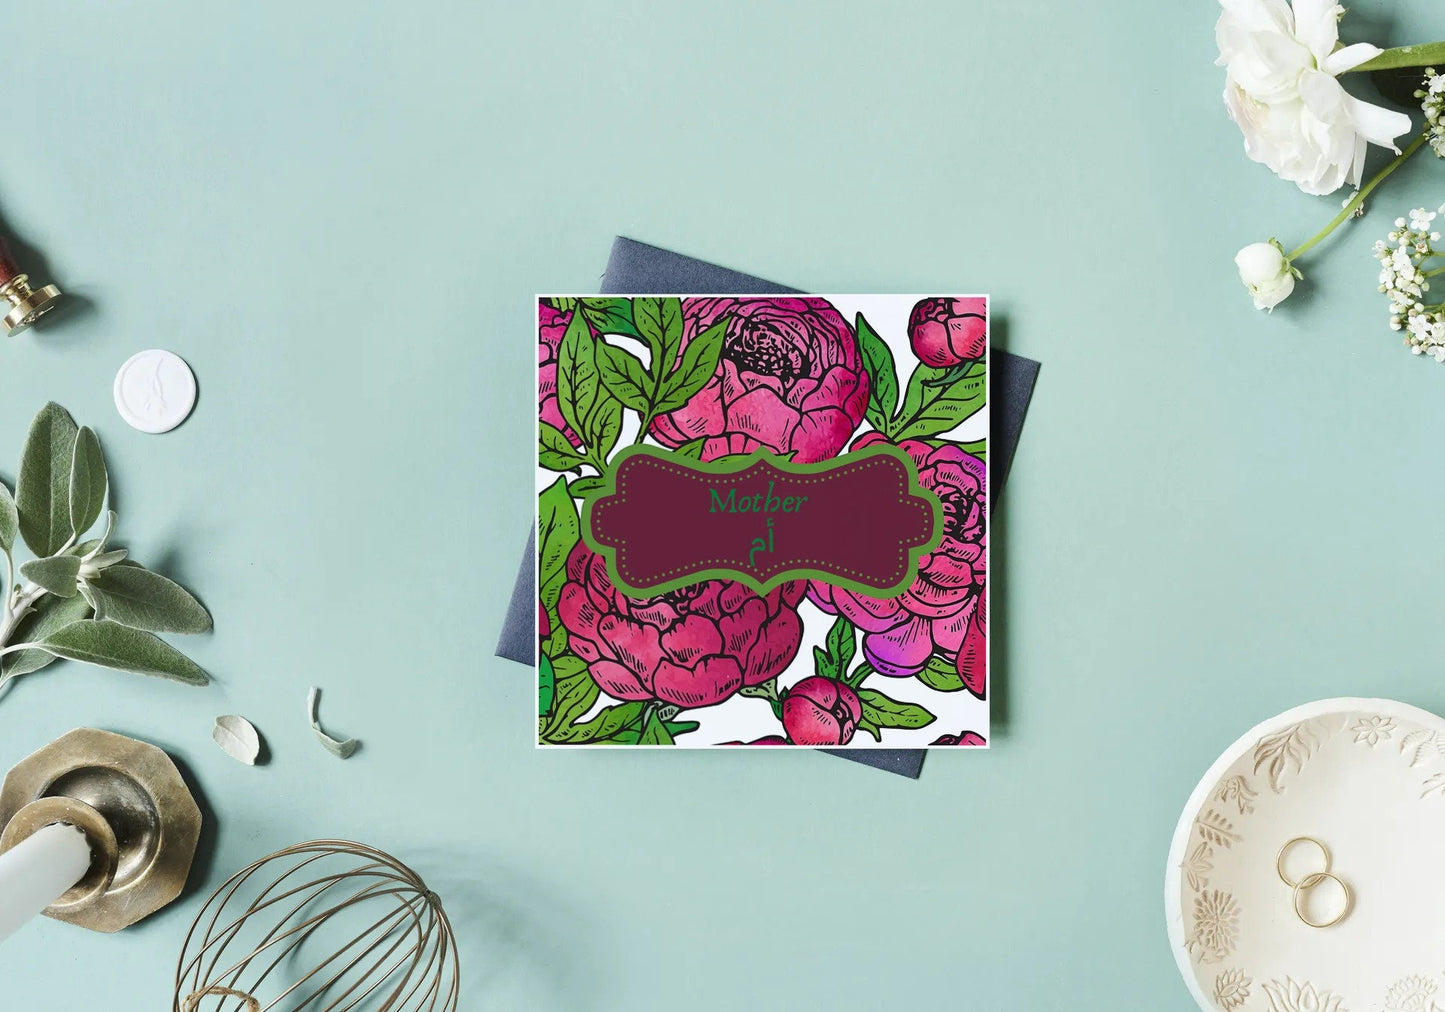 Mother Greeting card, Floral Greeting cardf written in english and arabic, inside is blank for your own greeting